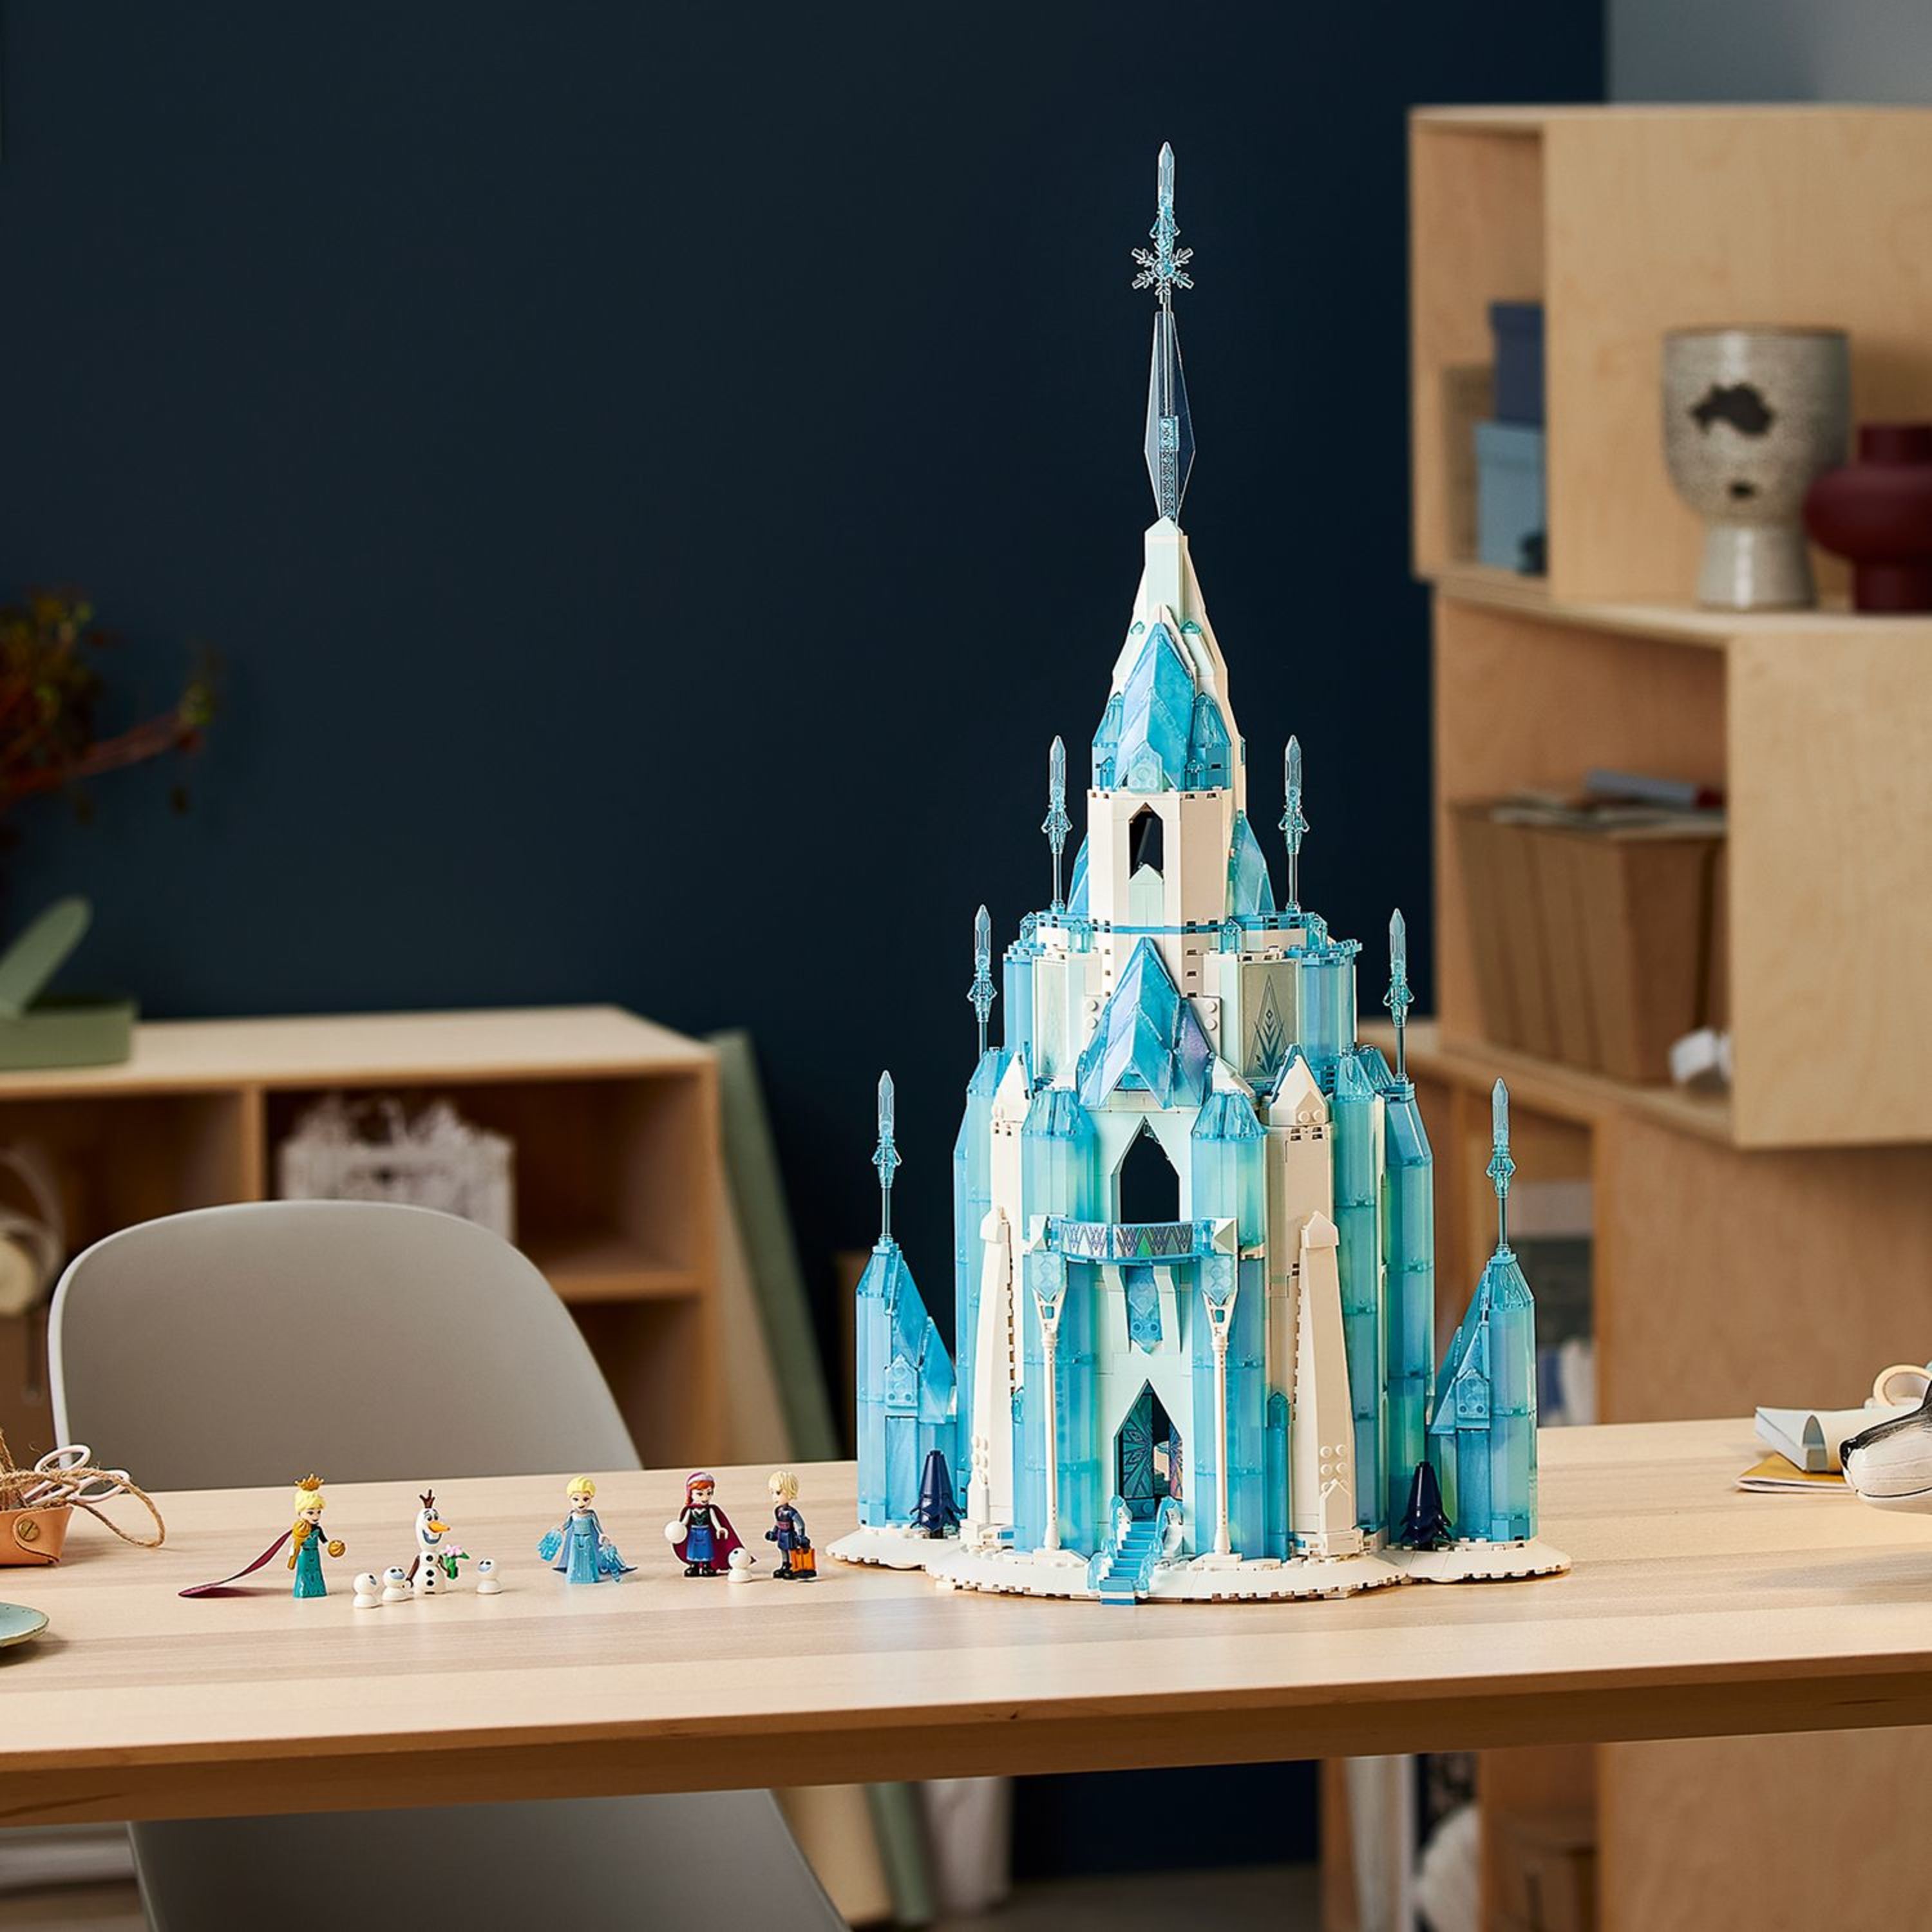 LEGO Disney Princess The Ice Castle Building Toy 43197, with Frozen Anna and Elsa Mini Doll Figures and Olaf Figure, Disney Castle Kit to Build, Disney Gift Idea, Castle Toy for Kids Age 6+ Years Old - image 4 of 8